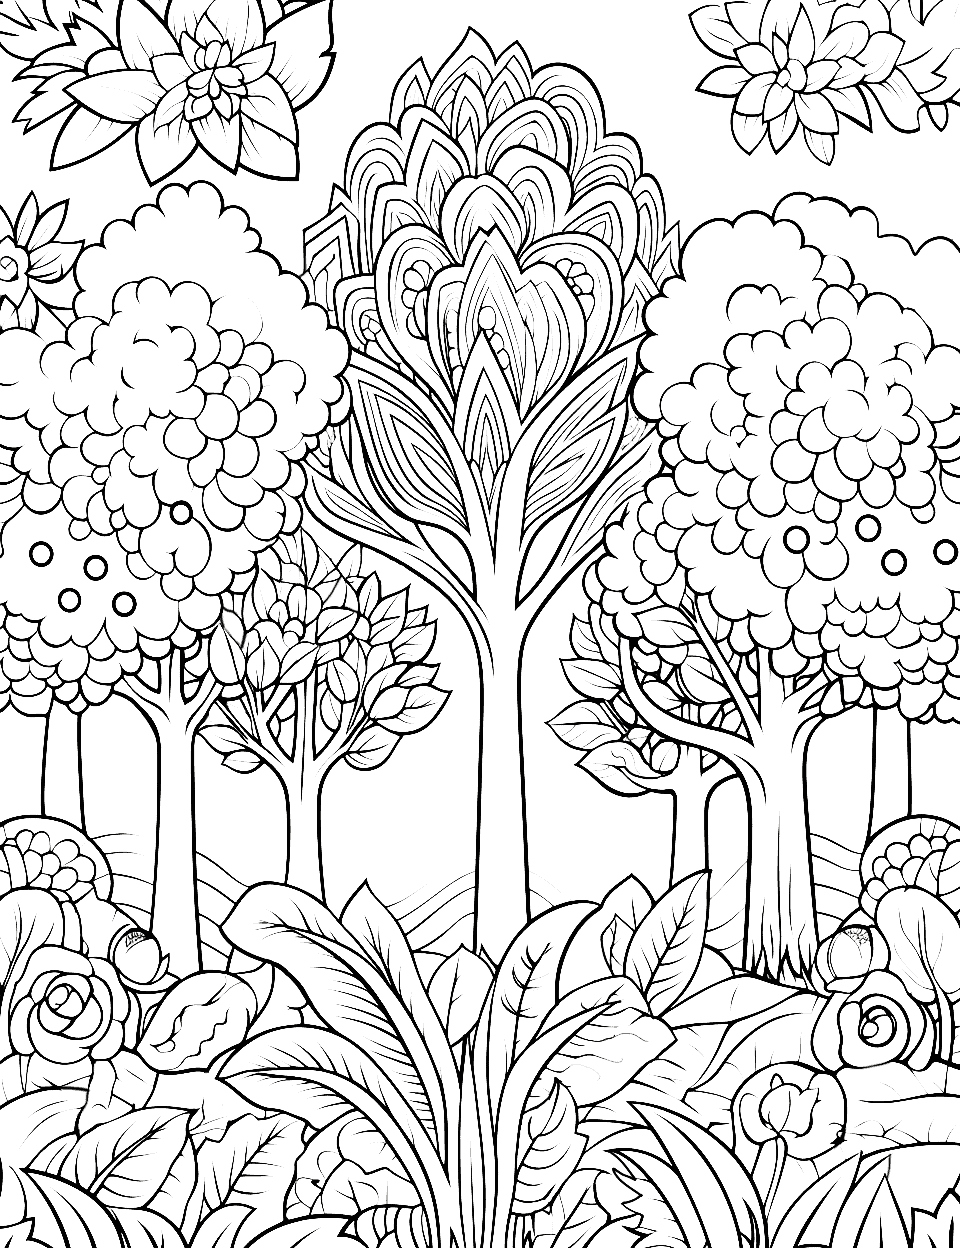 Enchanted Forest Adult Coloring Page - An amazing lush forest surrounded by elements of nature and flora.